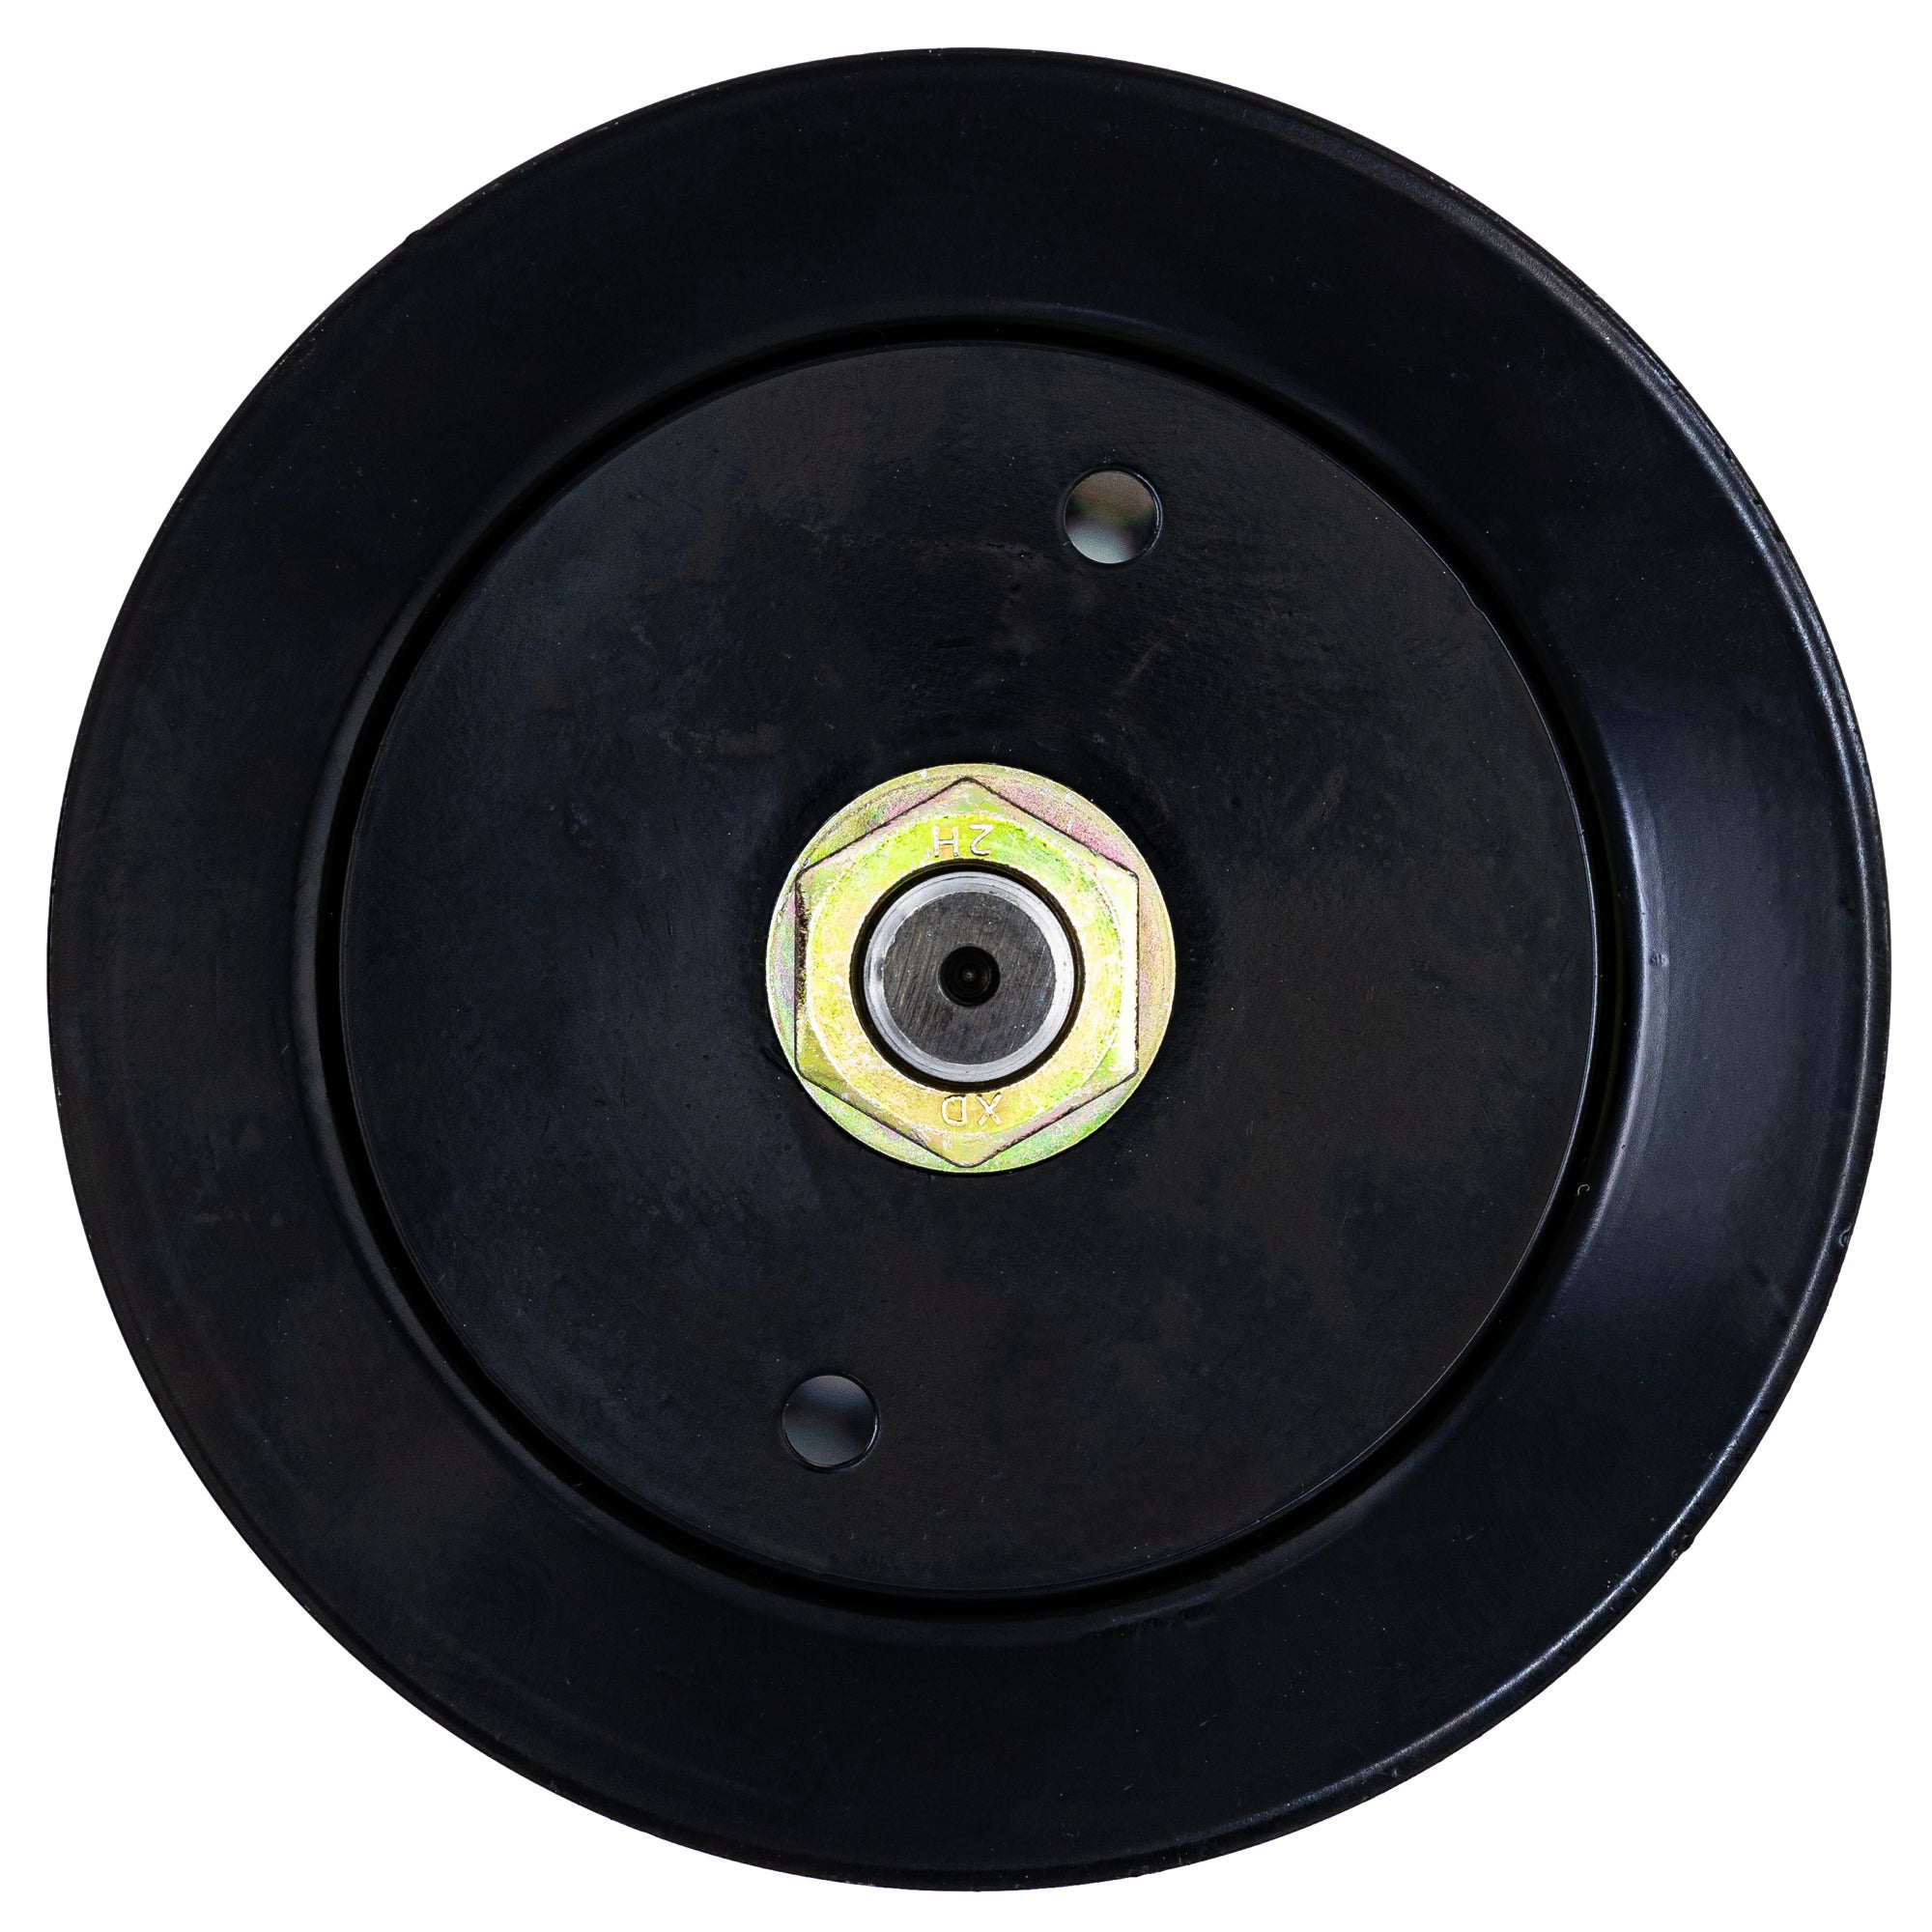 Mower Spindle for Exmark Lazer Z CT HP 1-323532 1-653386 52-Inch Deck